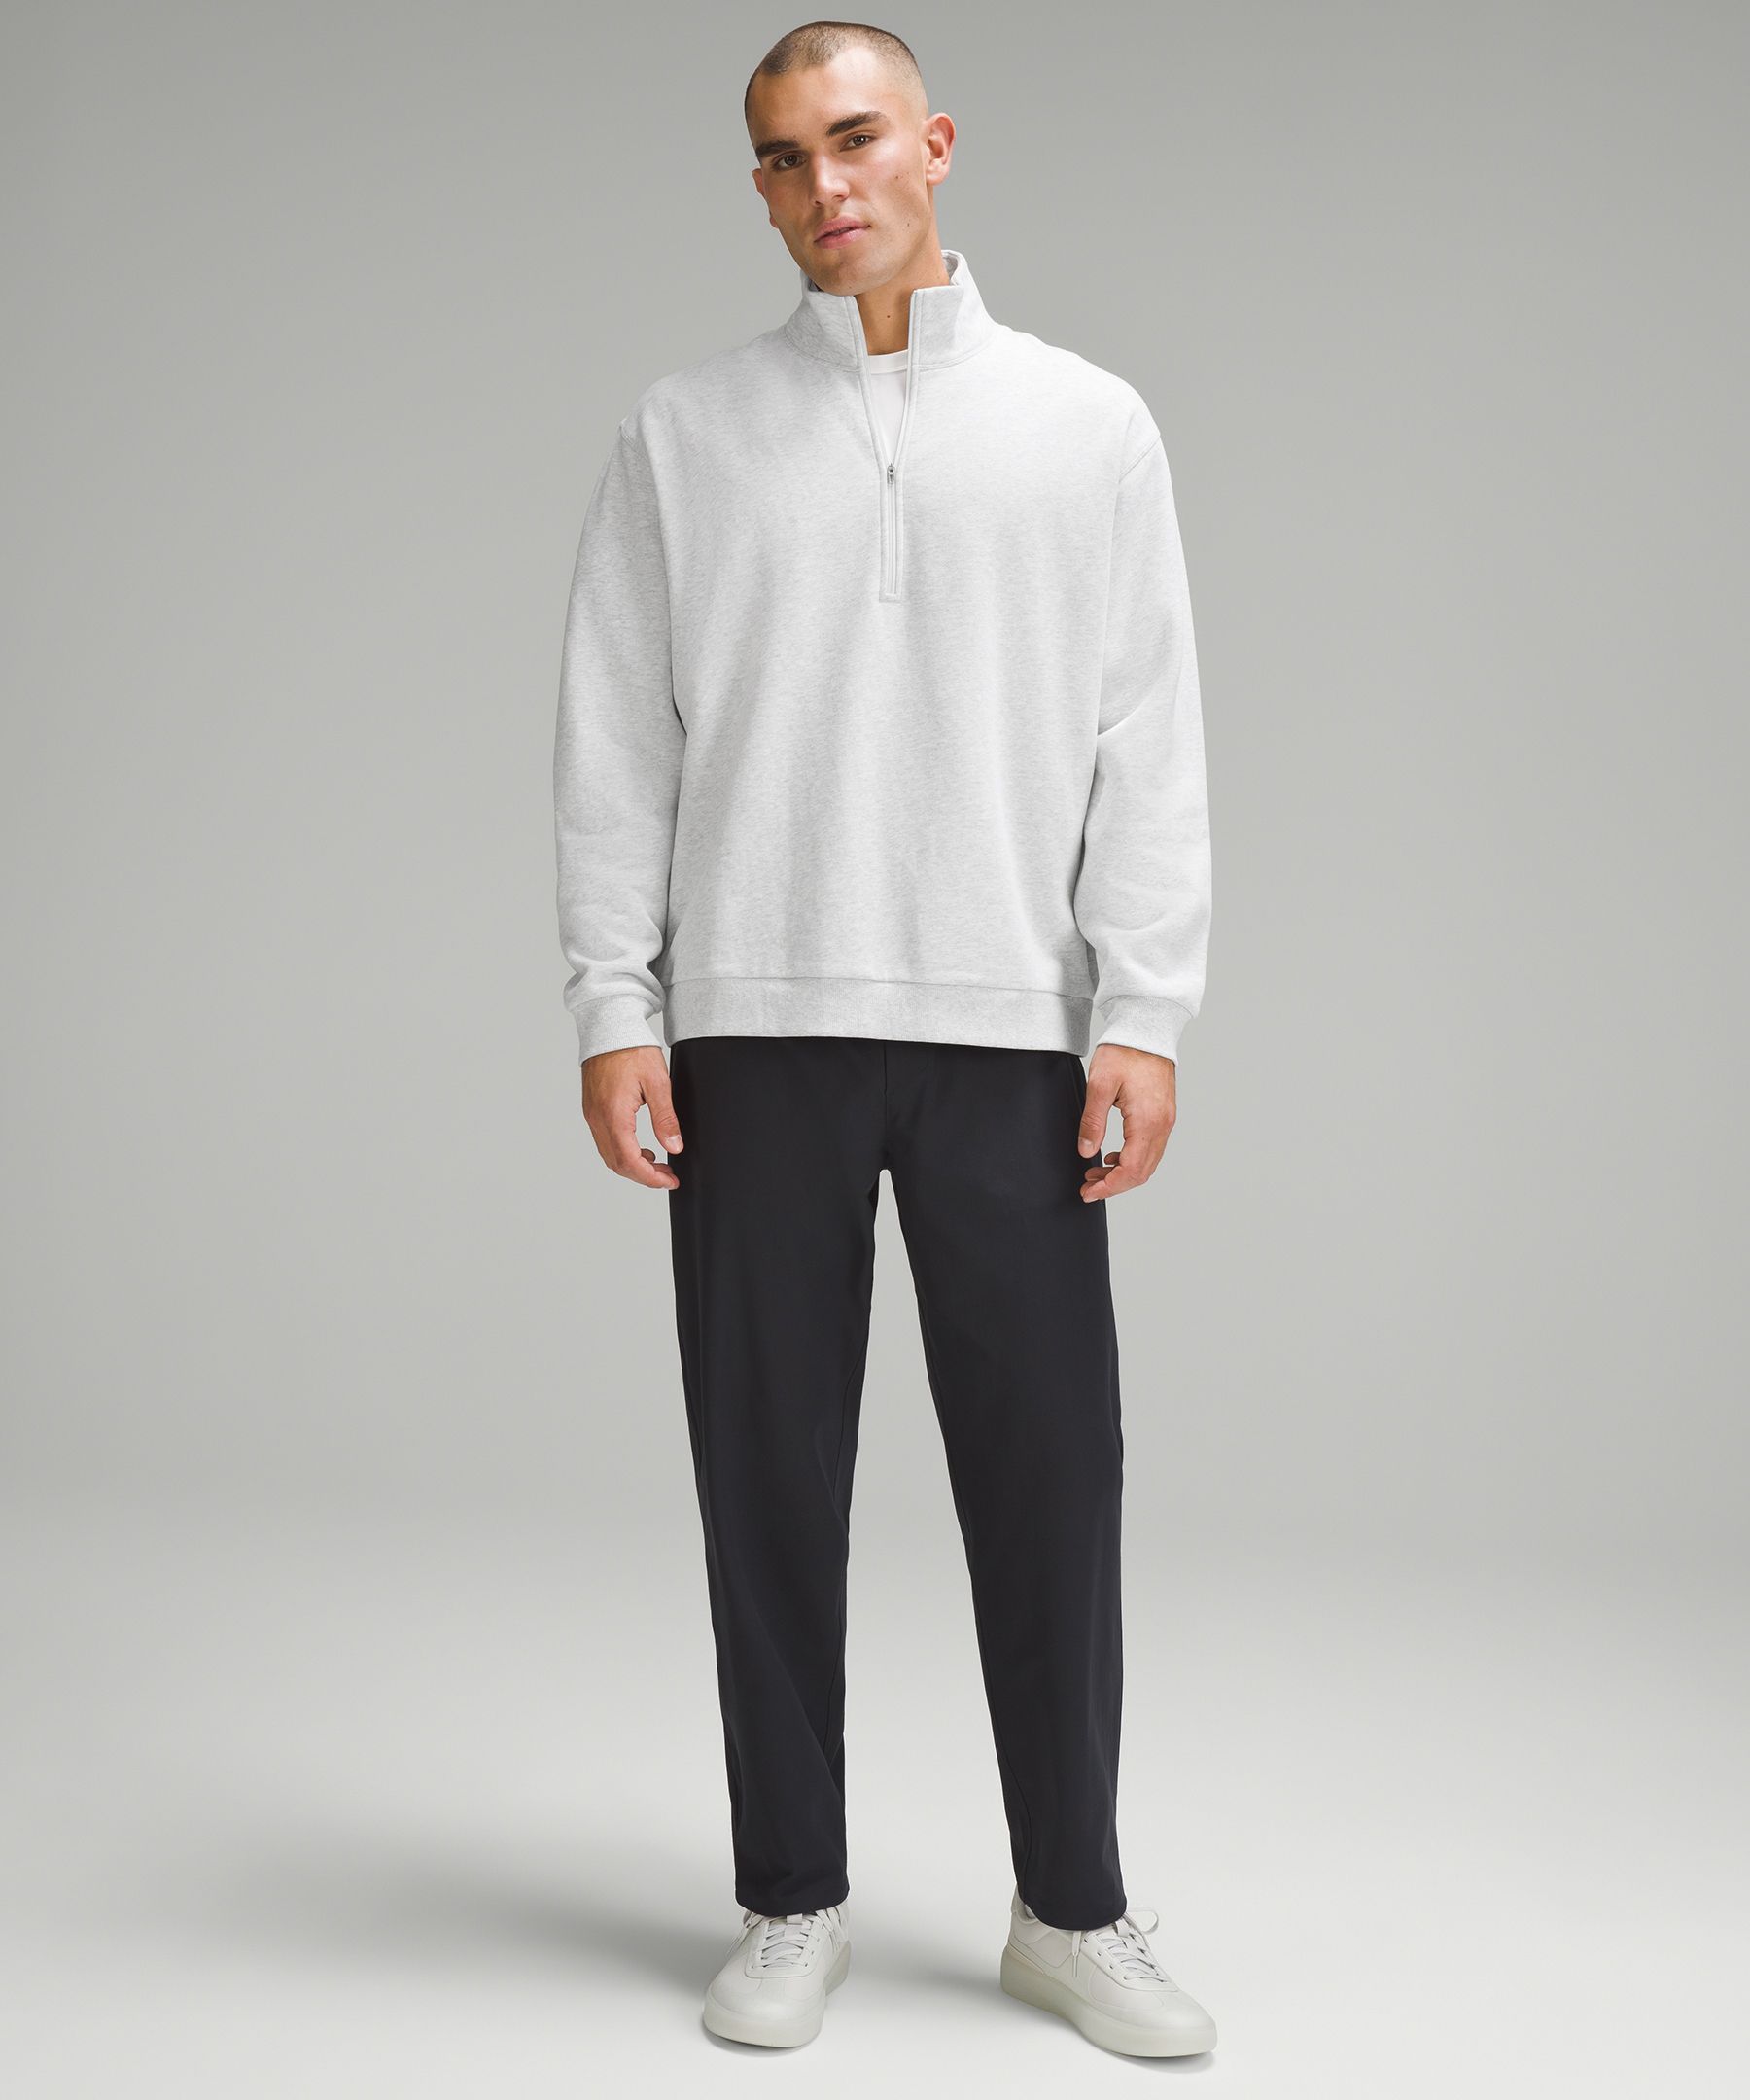 Men's Steady State Half Zip & Hoodie. Both XXL & Natural Ivory. I like  both, I can't decide which to keep. What do people think? : r/lululemon